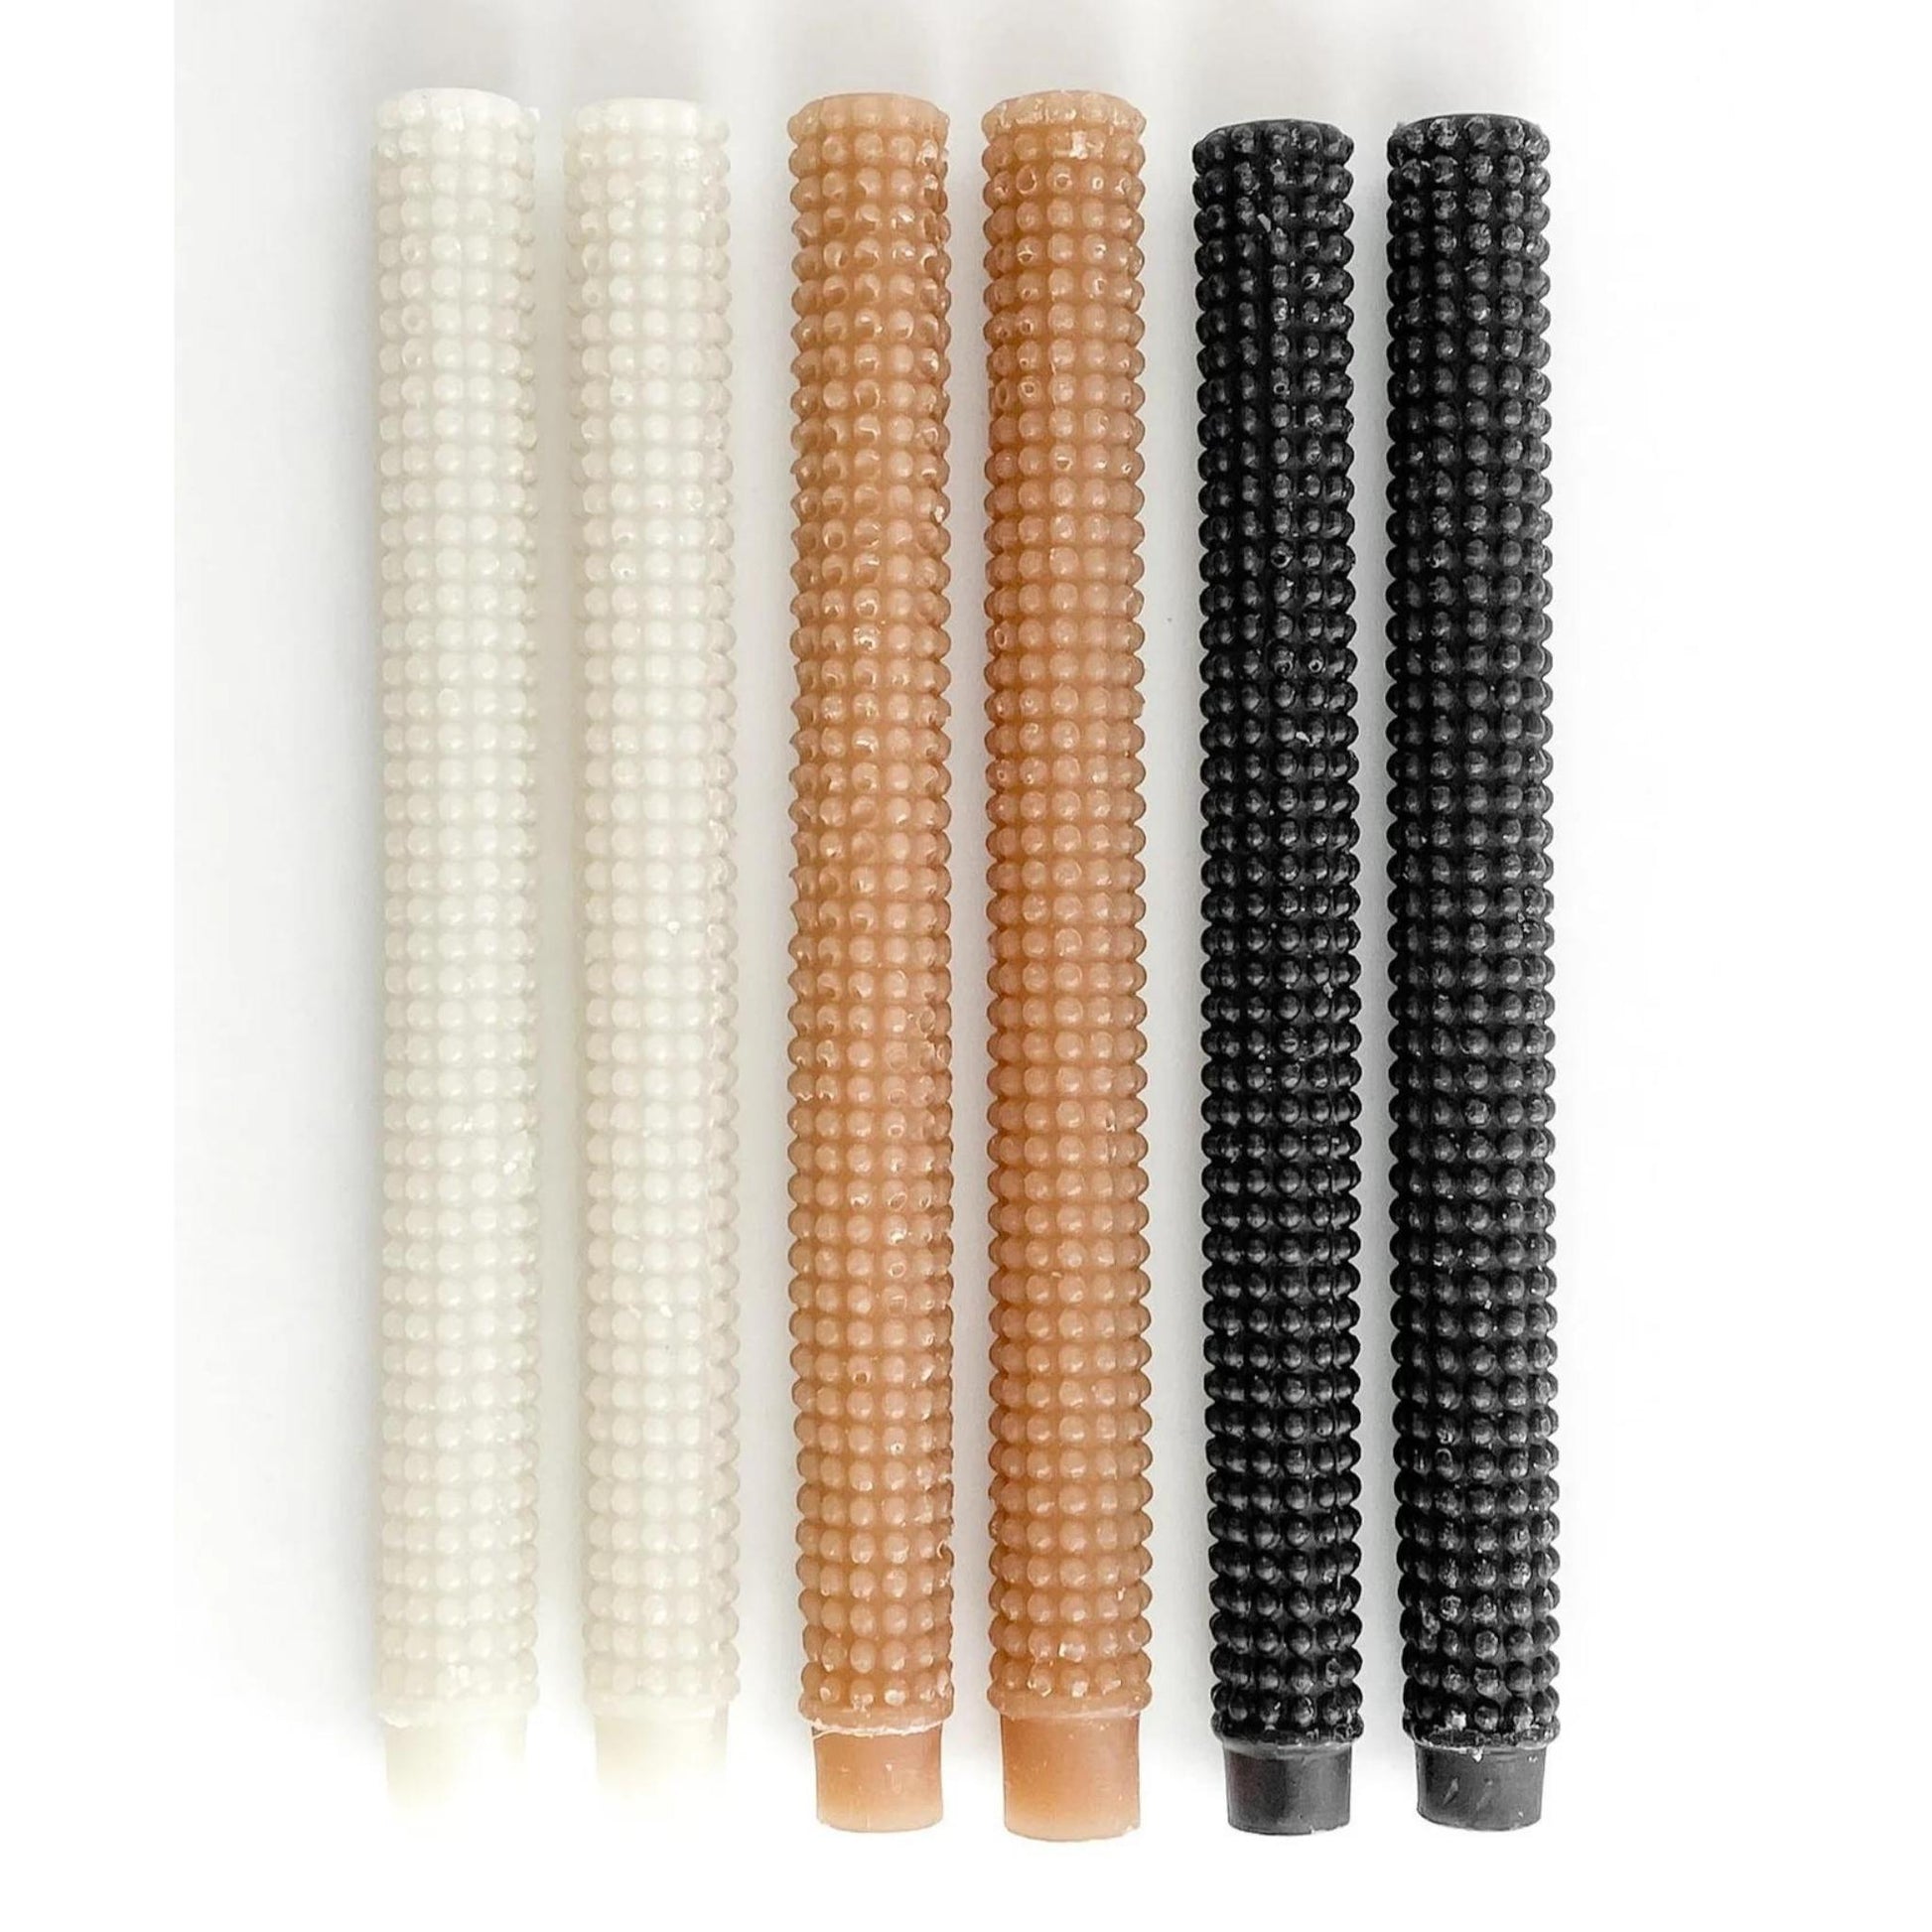 HOBNAIL TAPERS